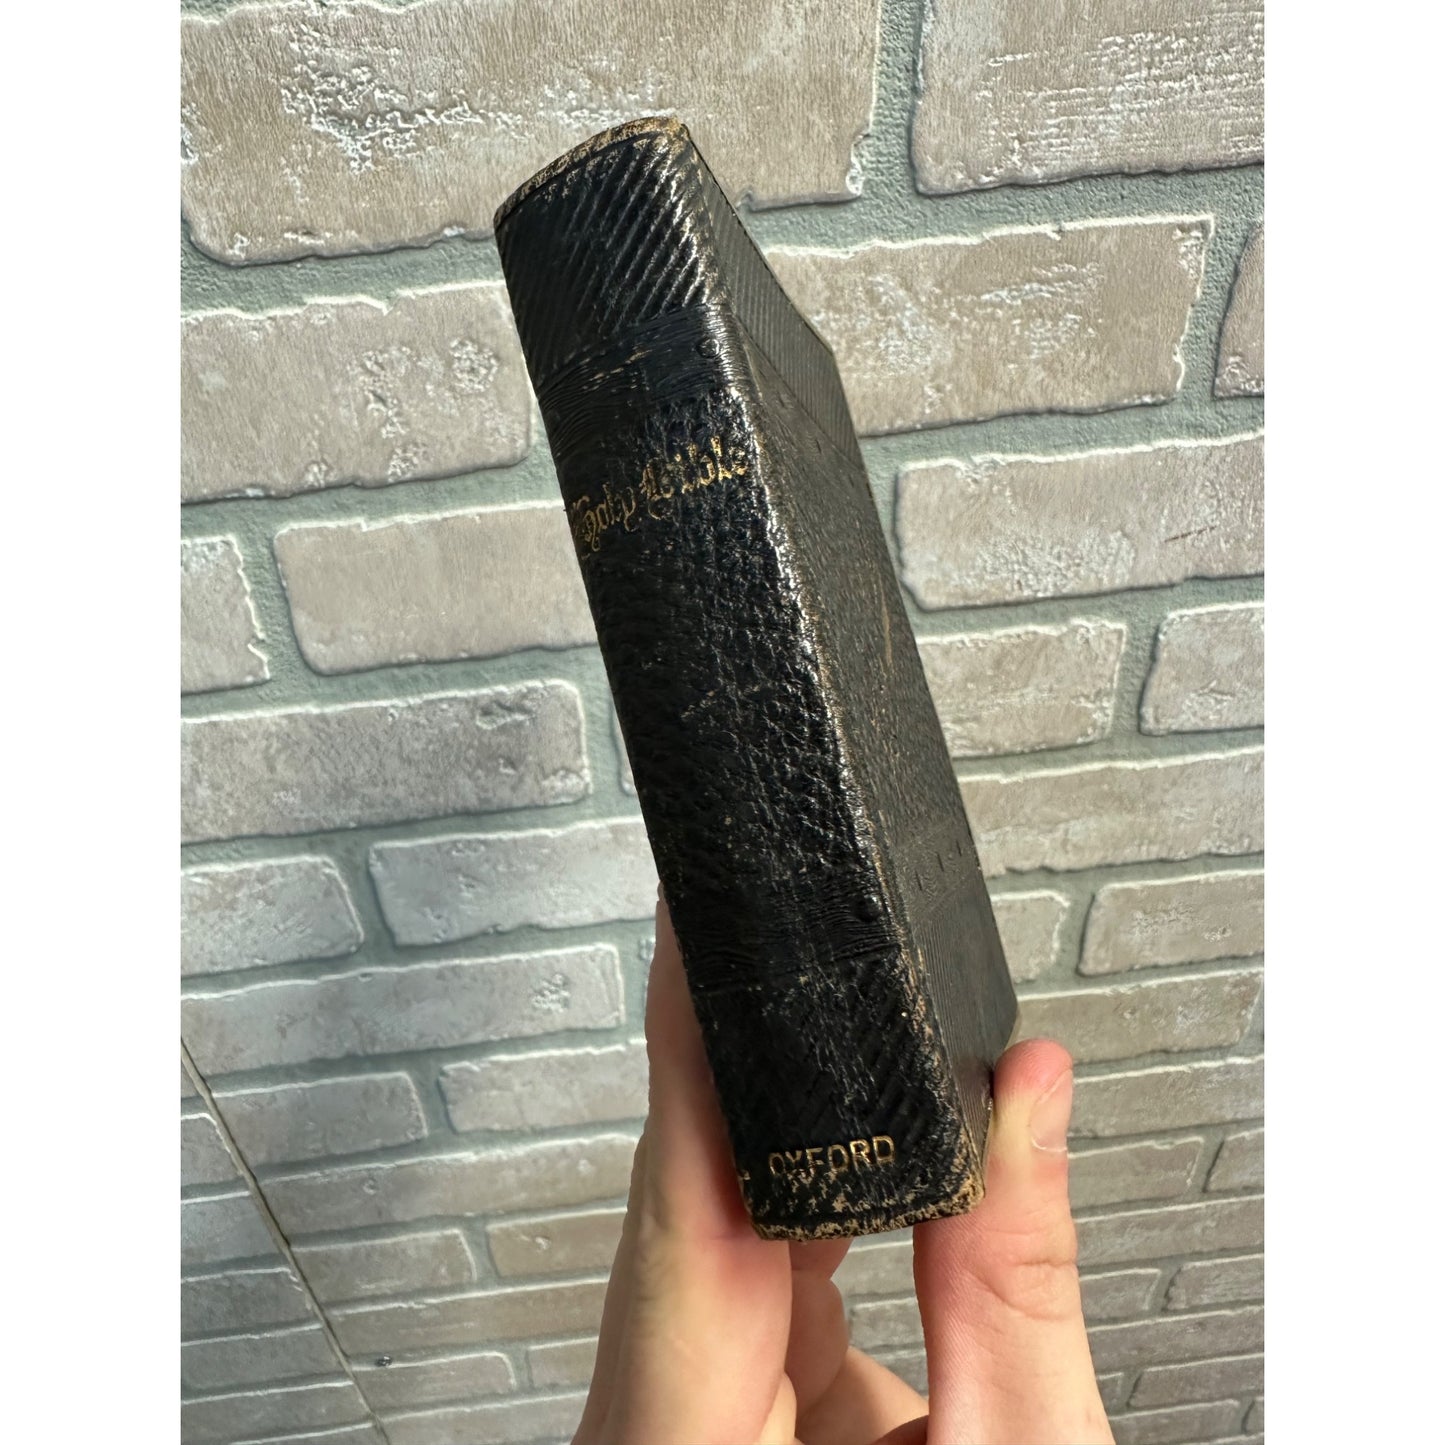 ANTIQUE 1890'S OXFORD UNIVERSITY PRESS HOLY BIBLE W/ CLASP LEATHER BOUND